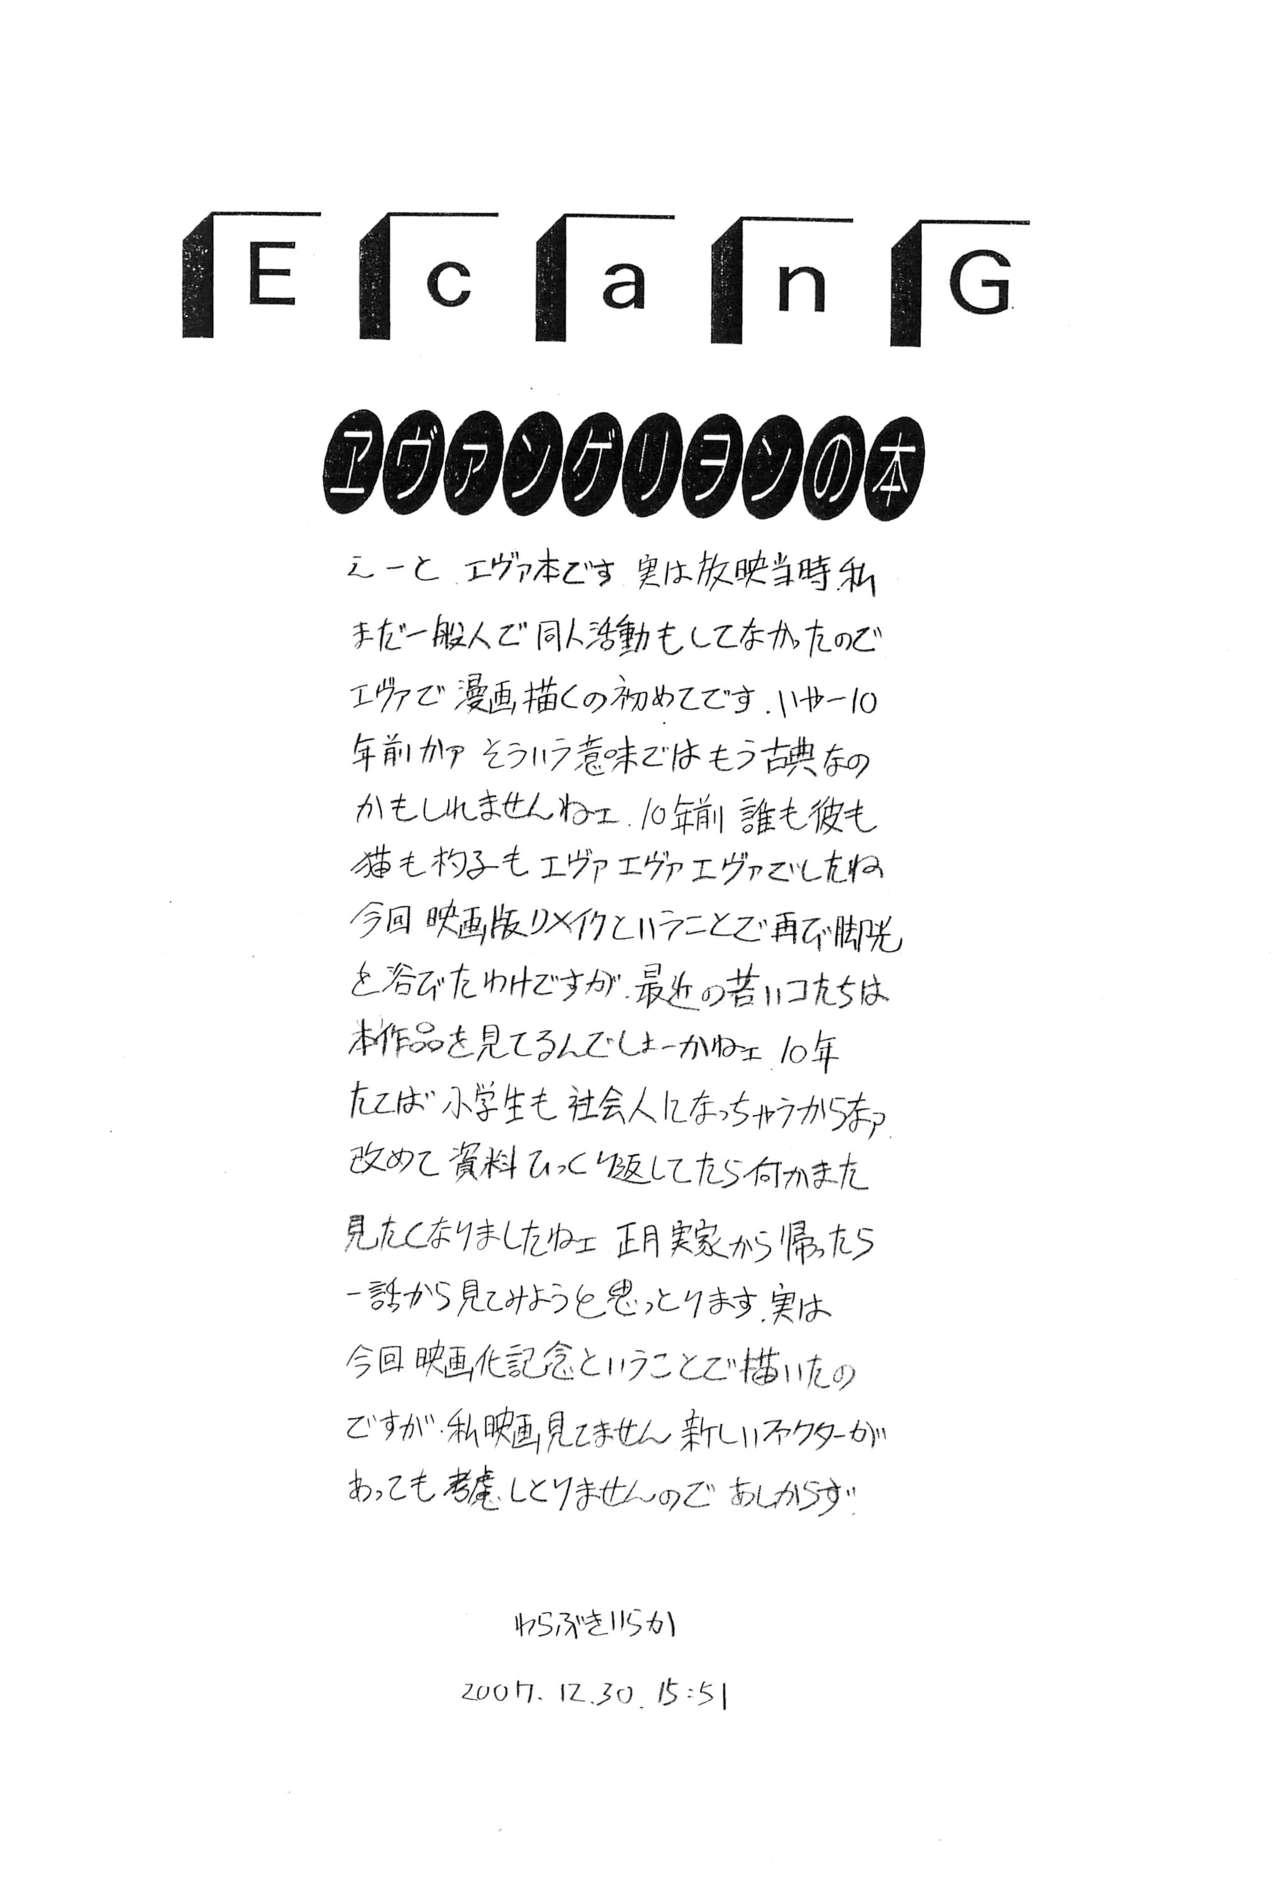 Thong E can G vol.20 - Neon genesis evangelion Dick - Page 2